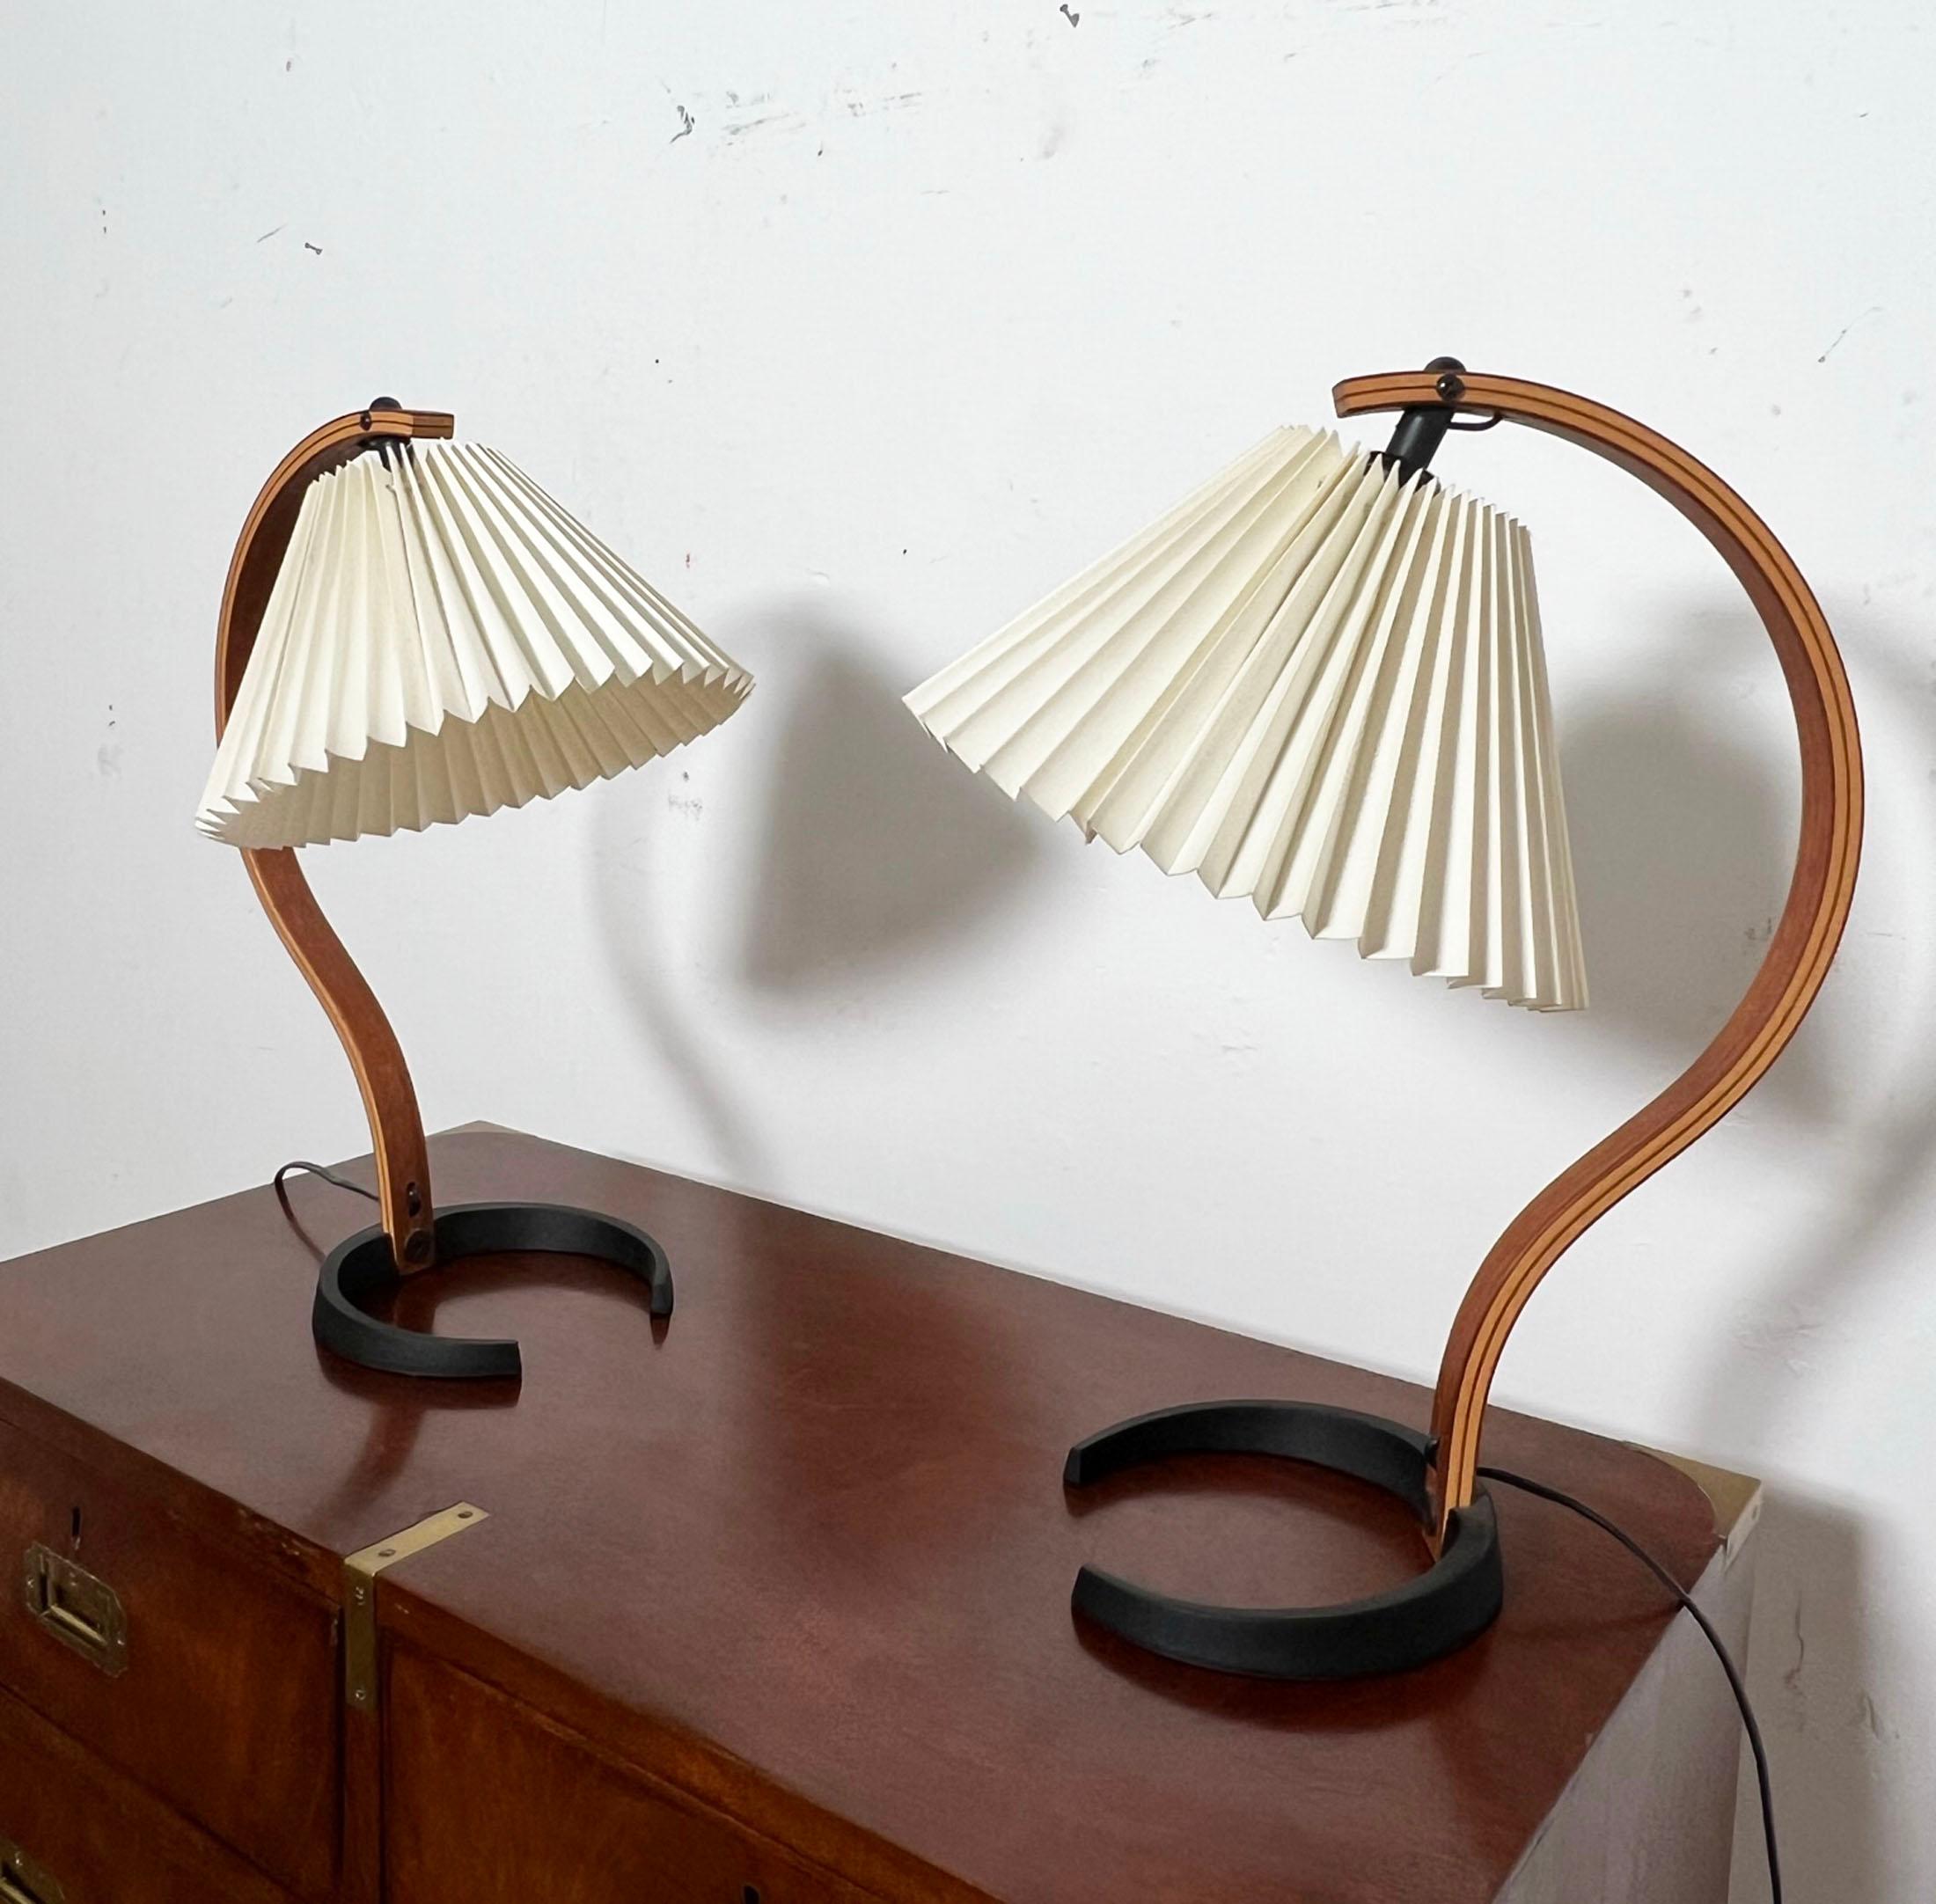 Pair of original 1970s era model 841 Danish lamps with cast iron bases in laminated birch and teak with pleated linen shades designed by Mads Caprani.